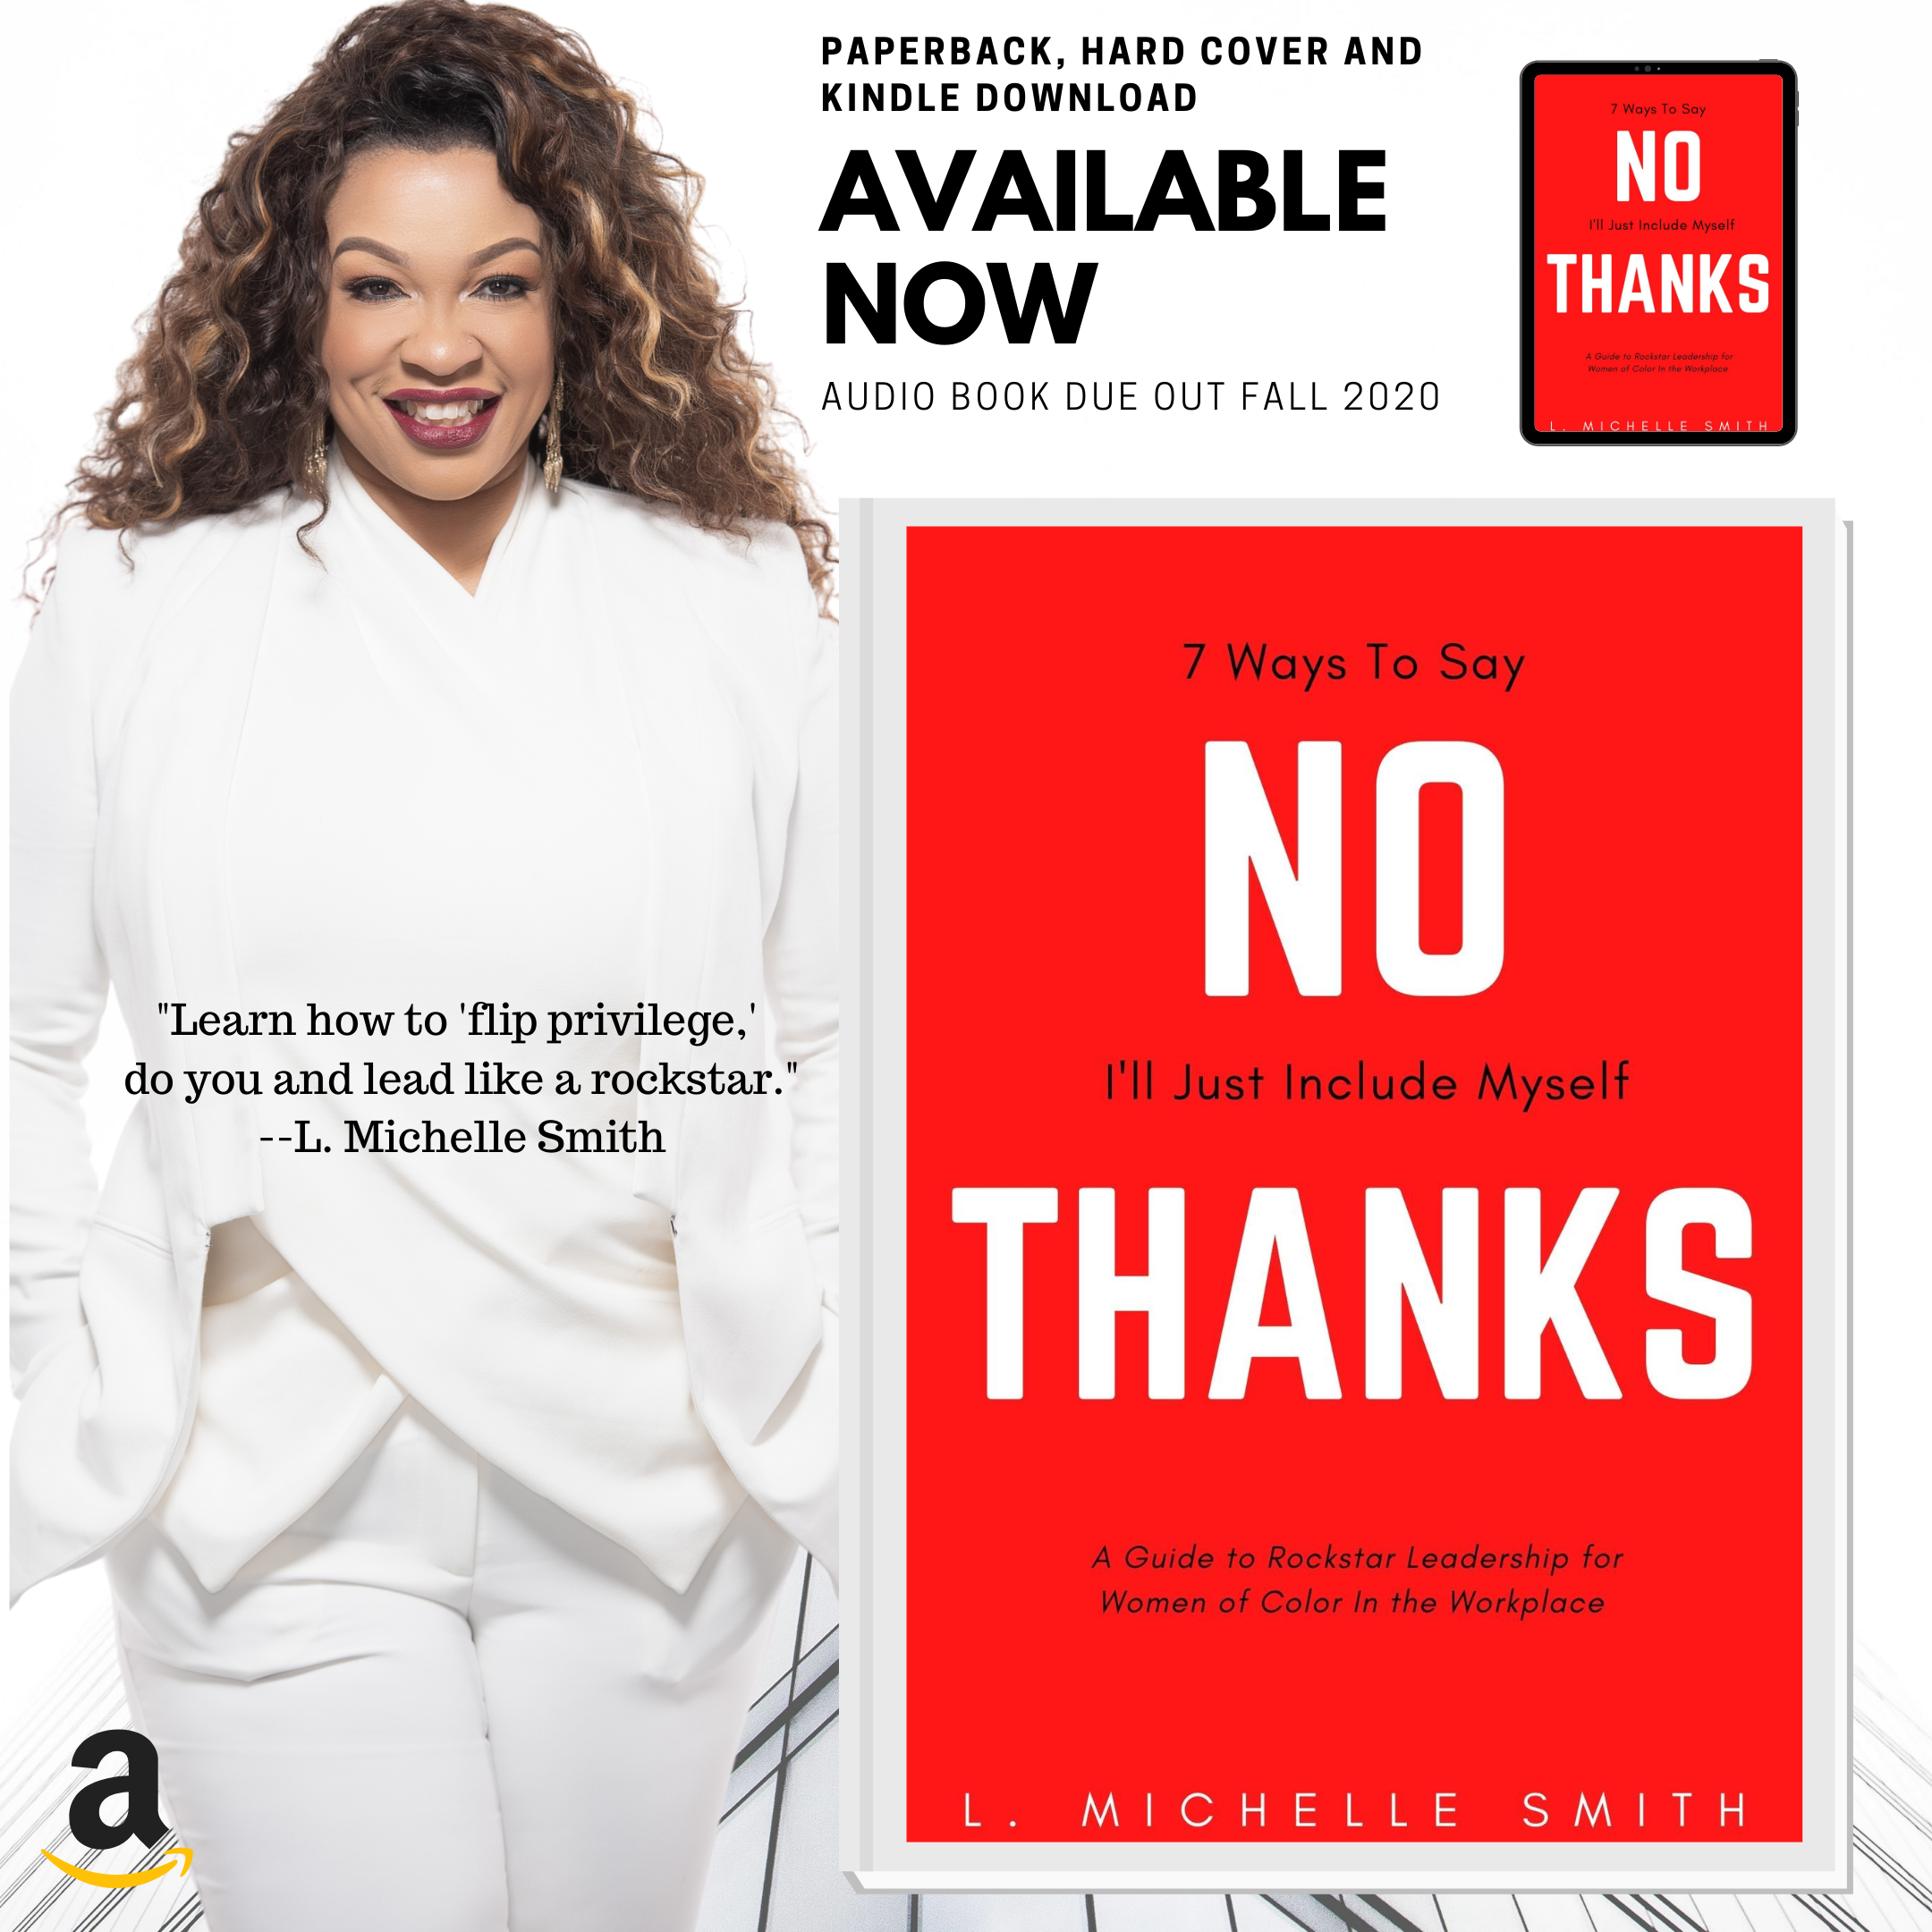 NEW BOOK: No Thanks, 7 Ways to Say I’ll Just Include Myself